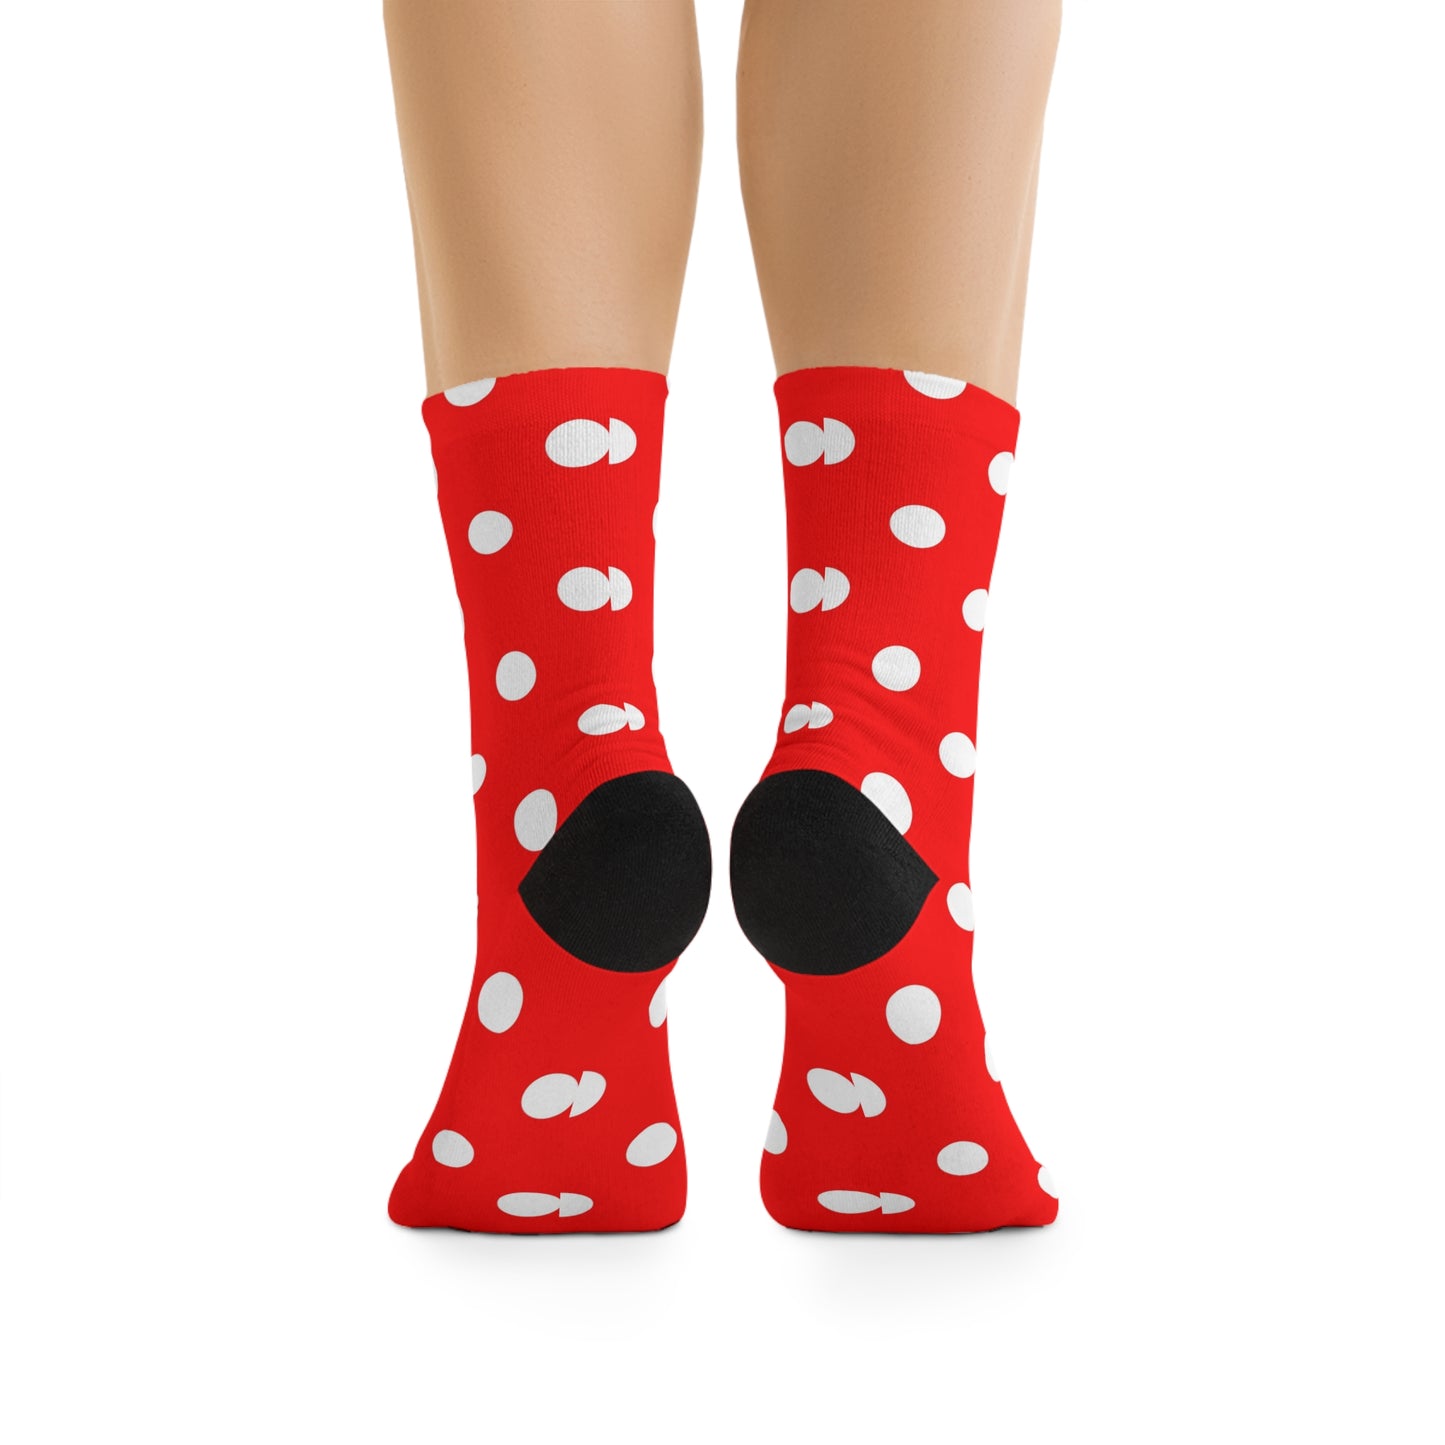 Red With White Polka Dots Socks